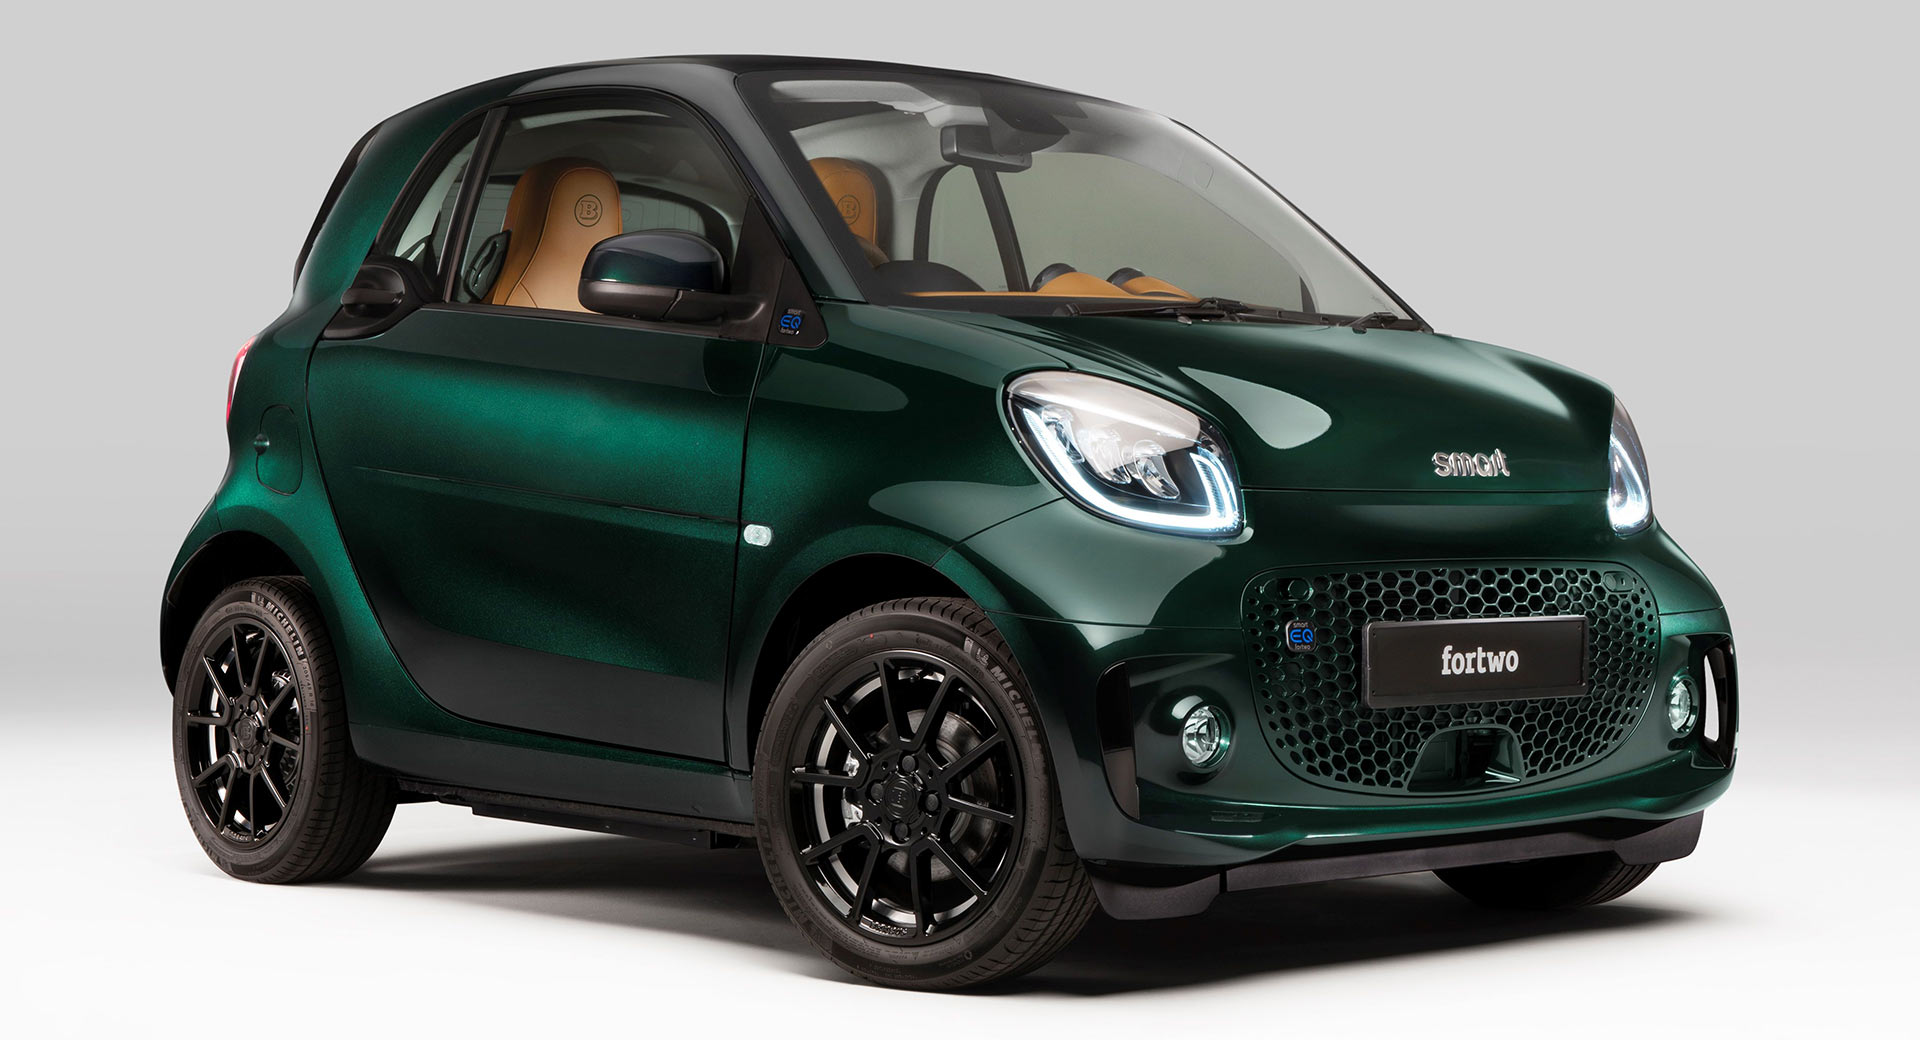 https://www.carscoops.com/wp-content/uploads/2021/07/Brabus-Smart-ForTwo-1a.jpg